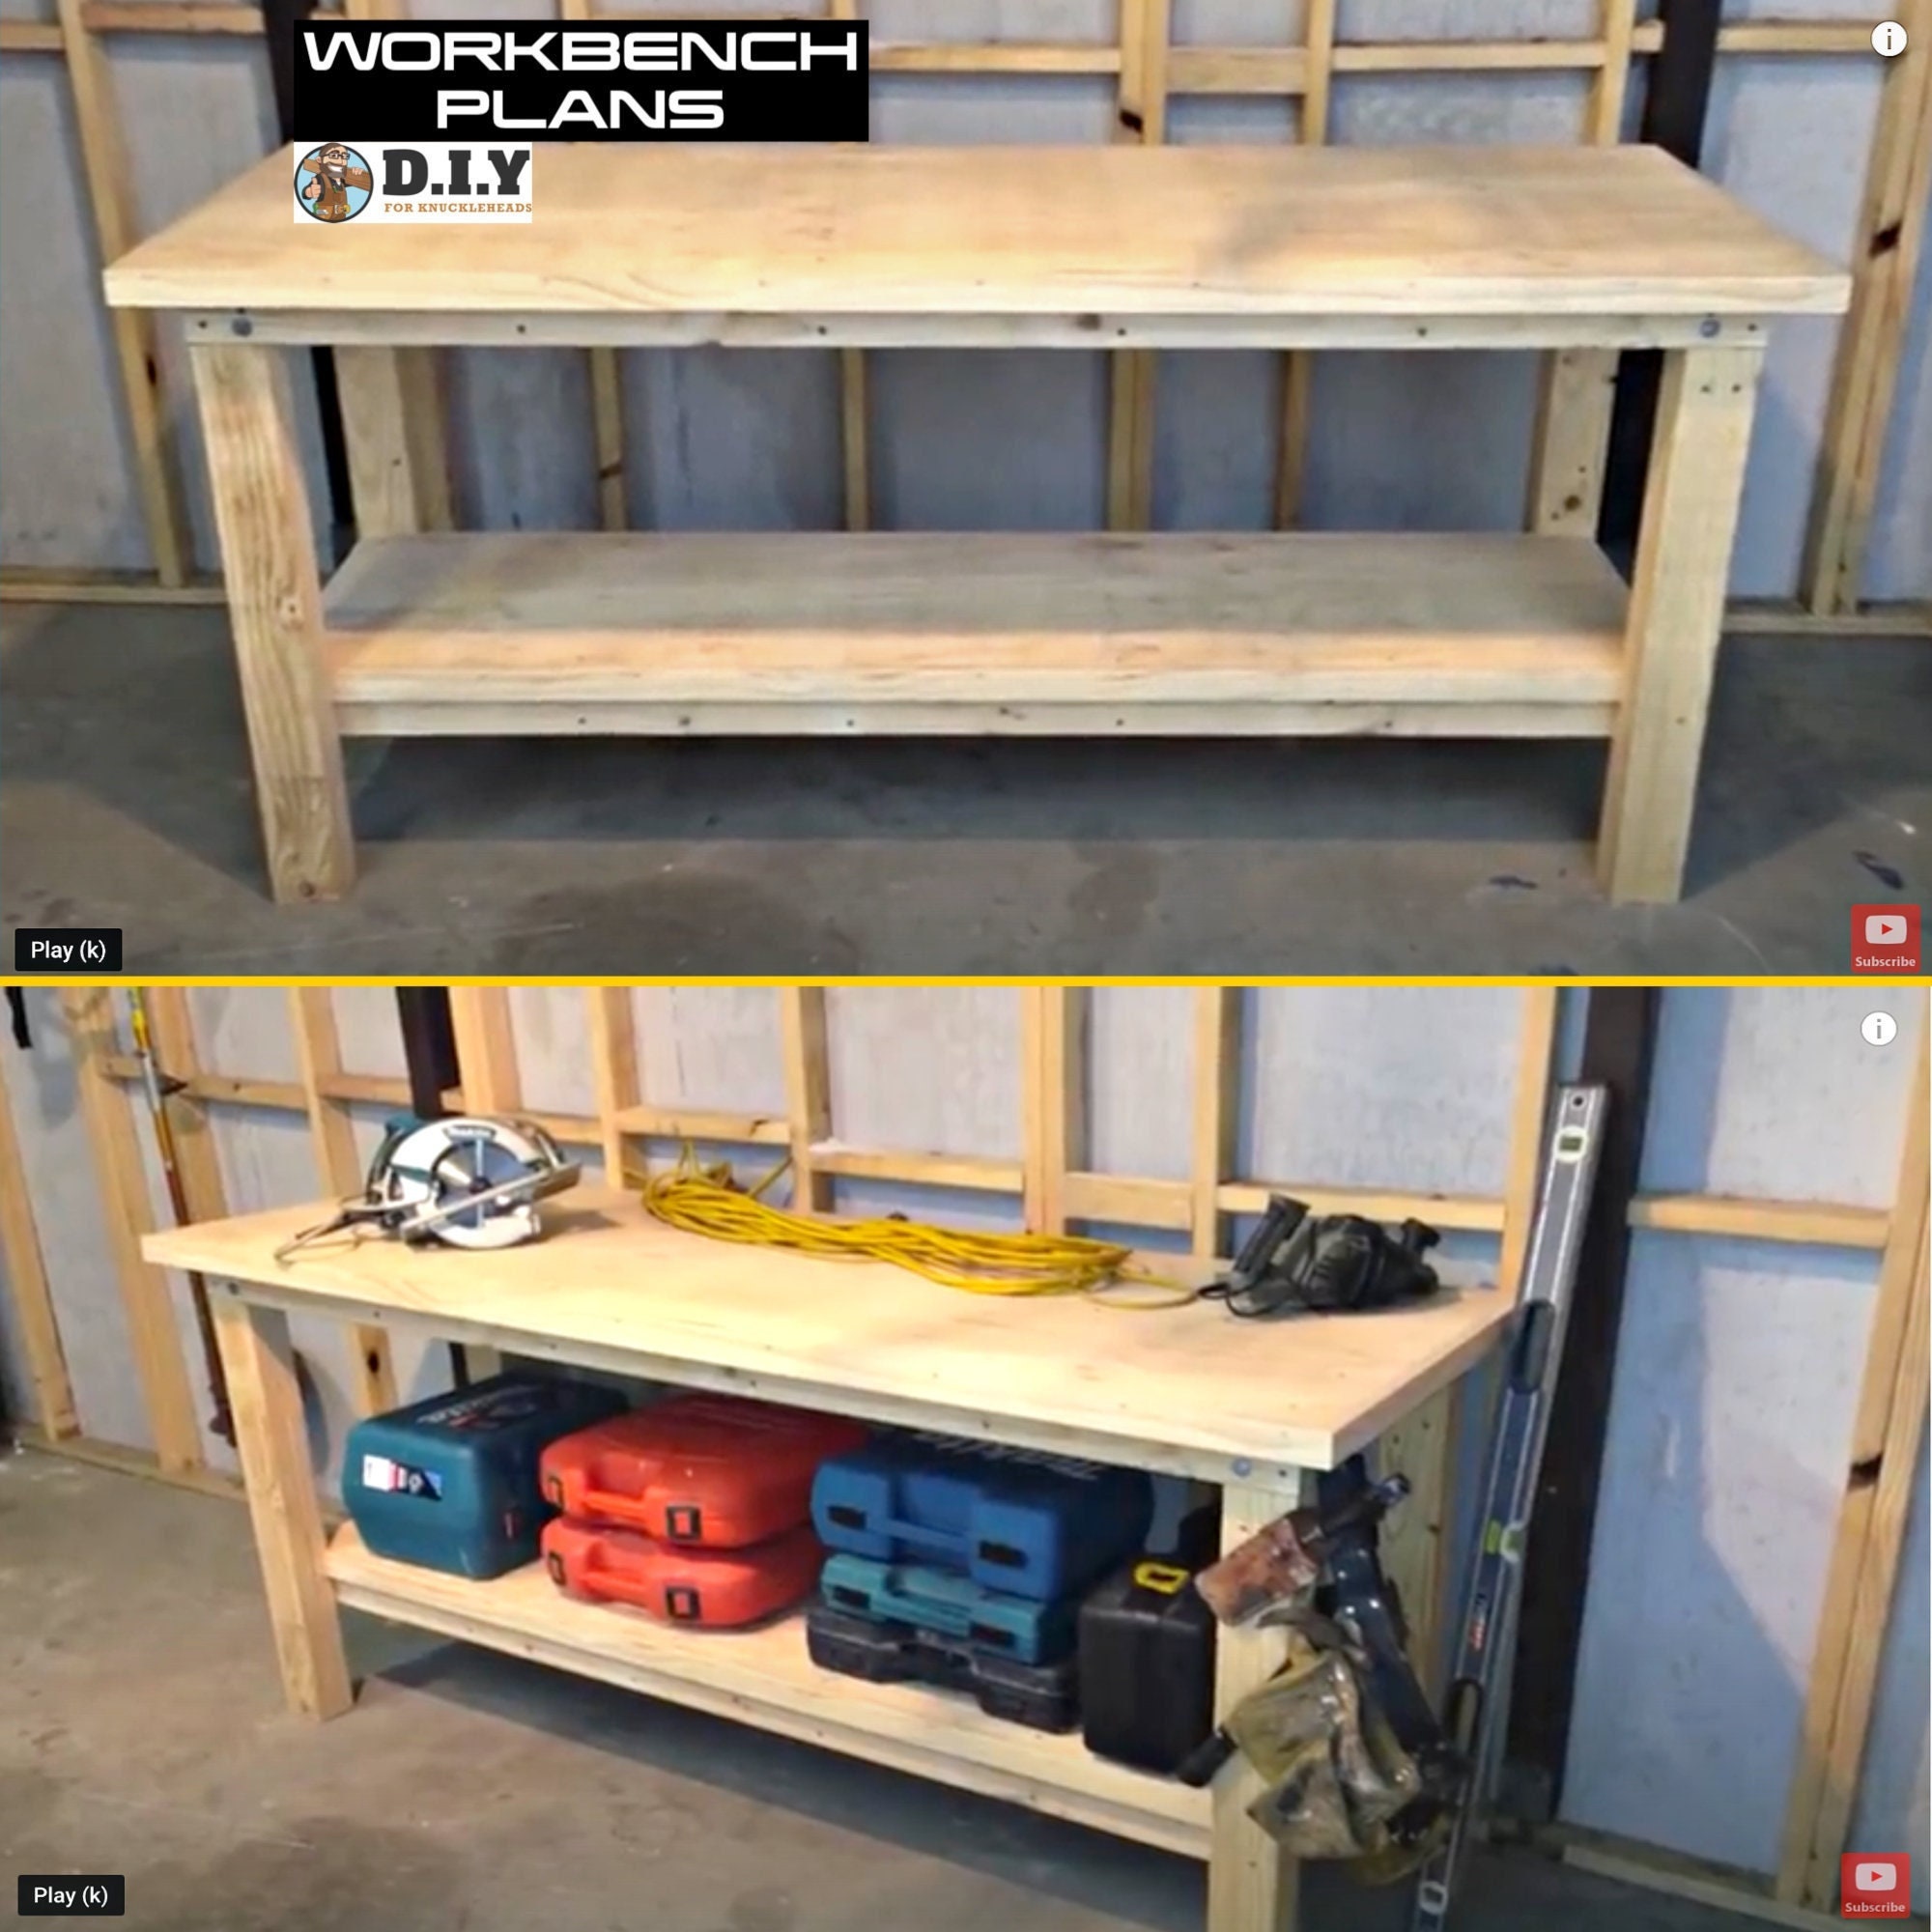 BEFORE & AFTER: Garage Workbench Makeover Using Beyond Paint